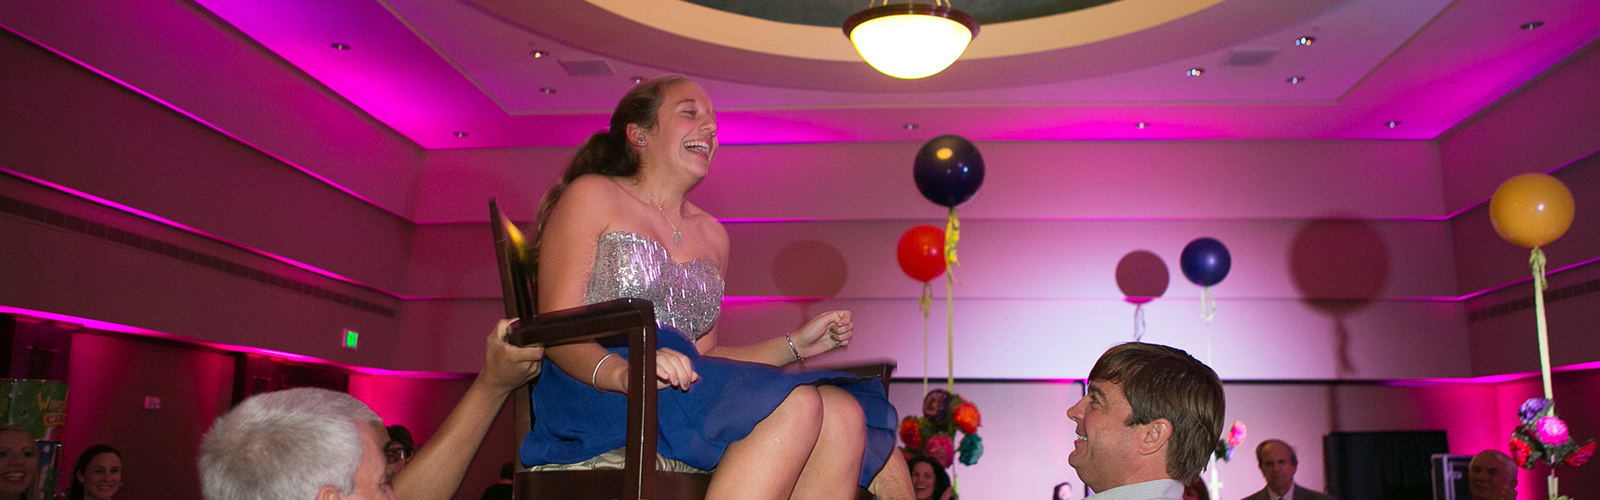 <h1>Mitzvahs</h1><p>“There was never a dull moment and that truly is why the party was so much fun. The kids and adults alike had a ball!”<strong>  Teri Aizenman - Mitzvah, Embassy Suites, Birmingham, Alabama</strong></p>